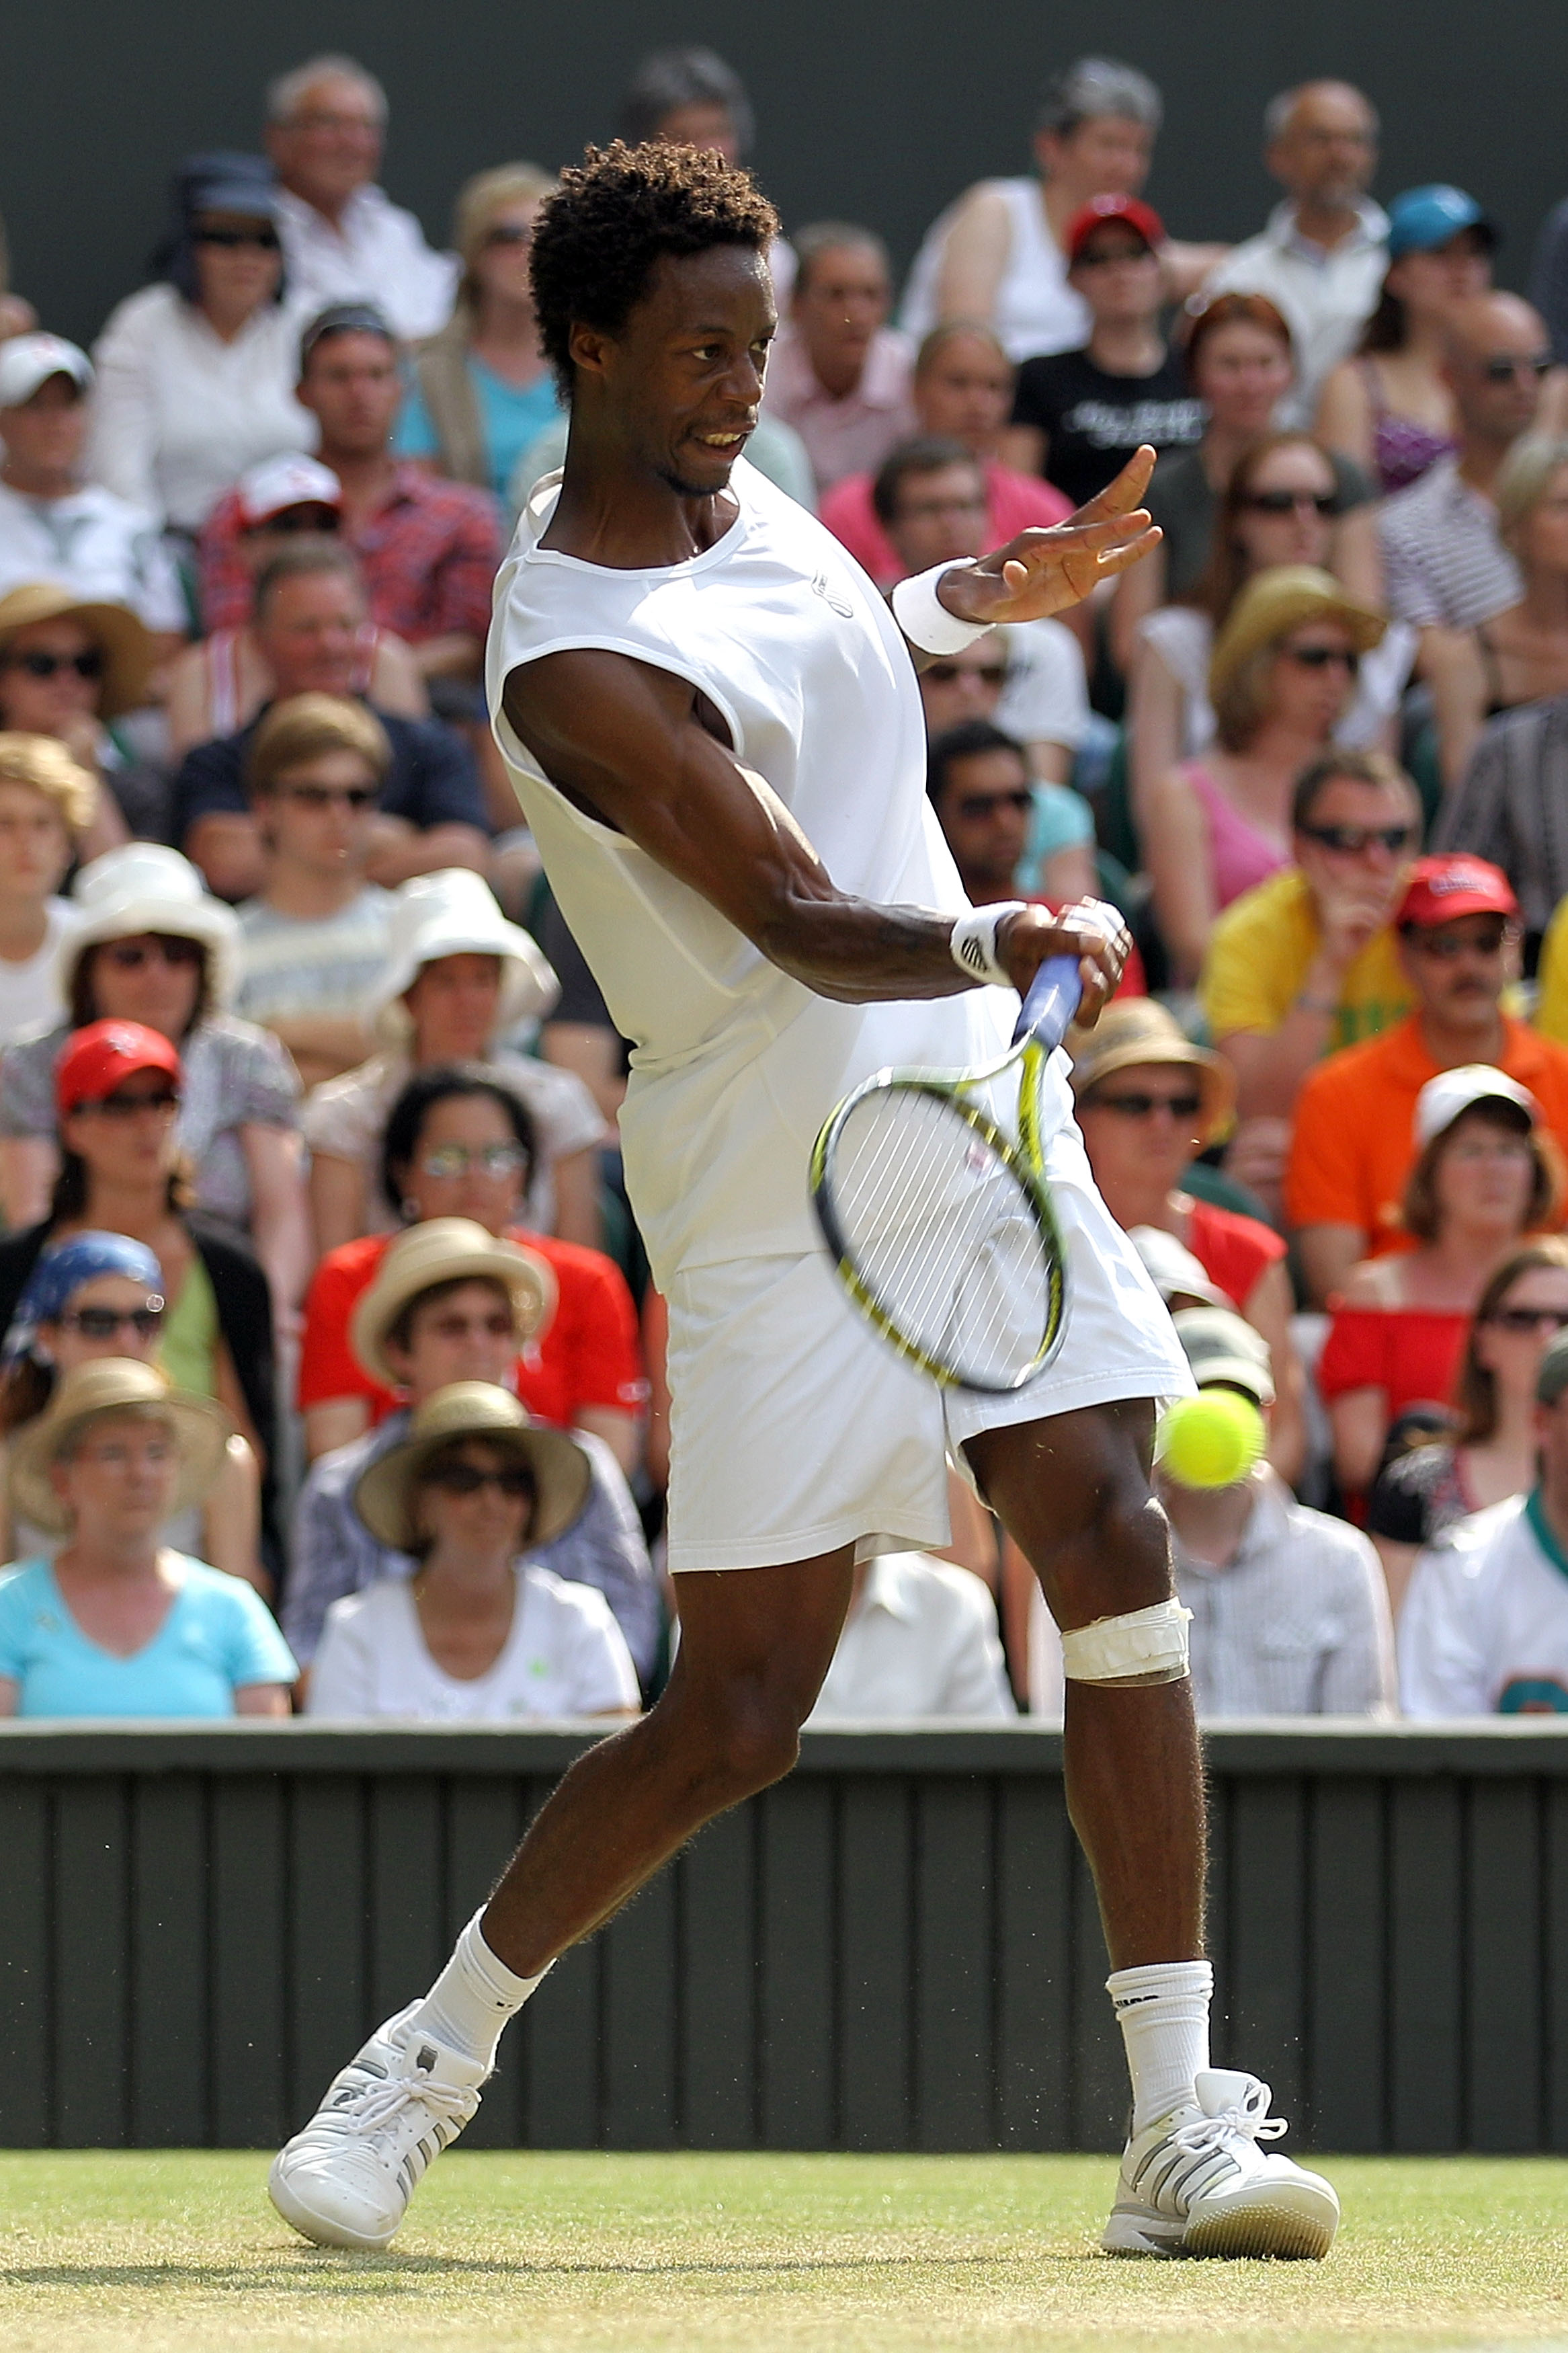 LONDON, ENGLAND - JUNE 25:  Gael Monfils of France plays a shot during his match against Lleyton Hewitt of Australia on Day Five of the Wimbledon Lawn Tennis Championships at the All England Lawn Tennis and Croquet Club on June 25, 2010 in London, England